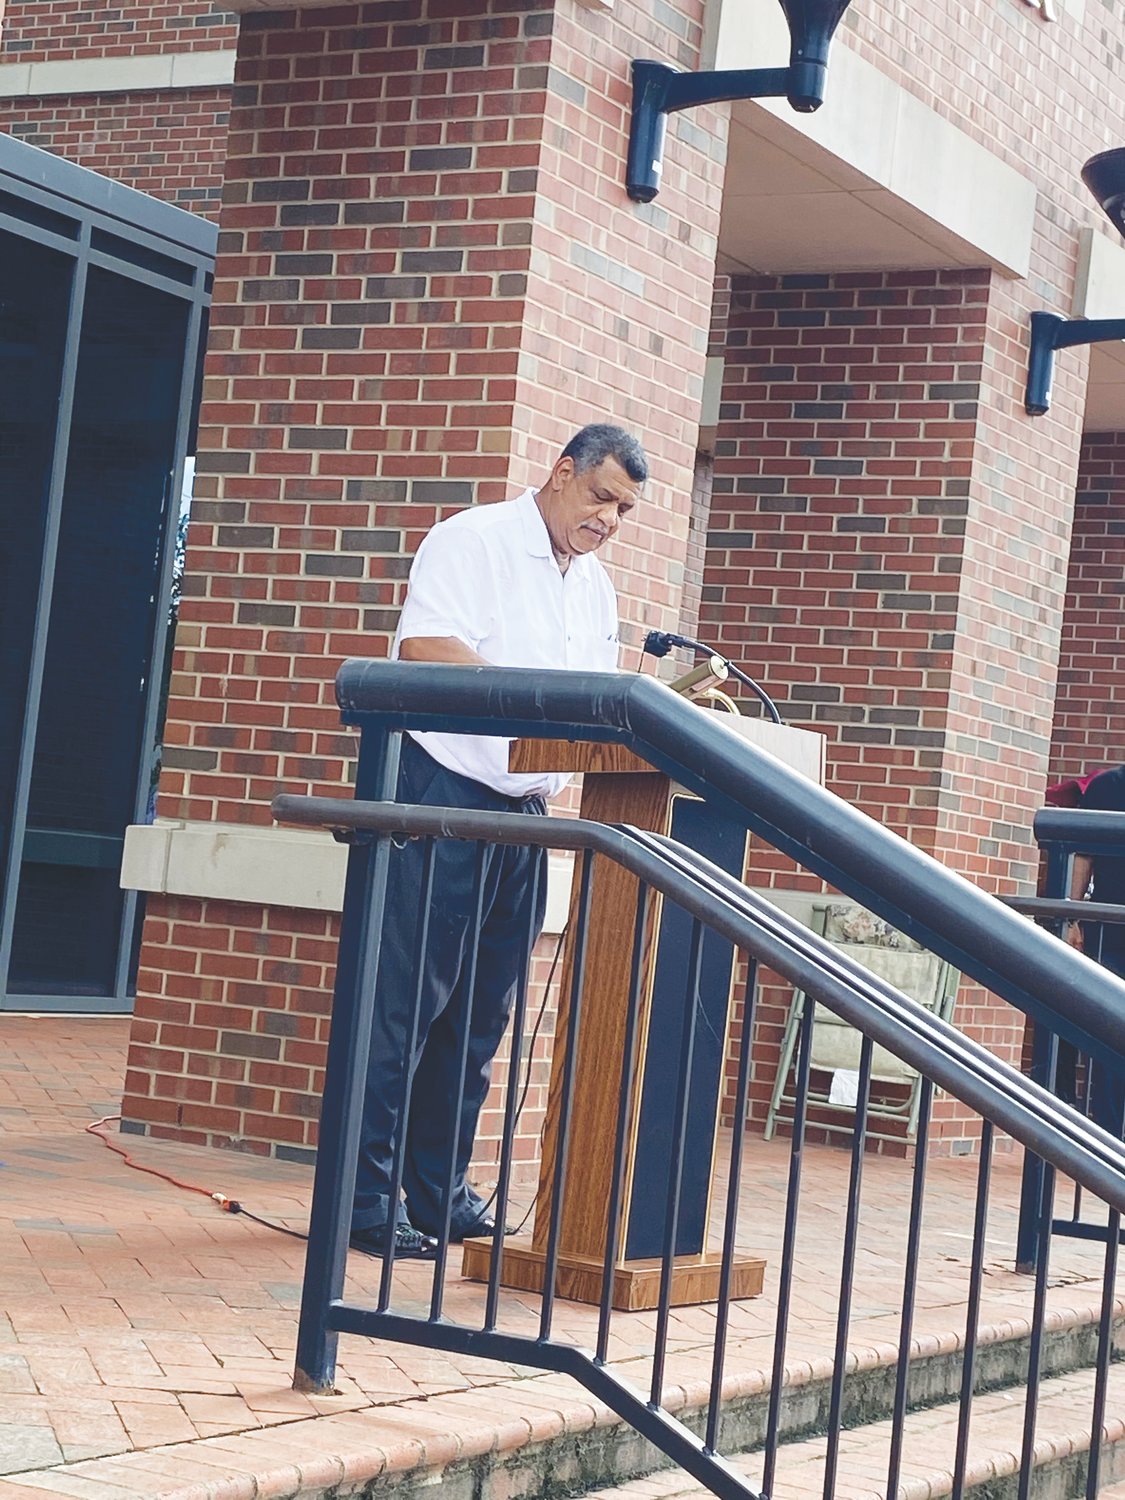 The Rev. Dr. Carl Thompson speaks at a Chatham County racial reconciliation event in Pittsboro in July.